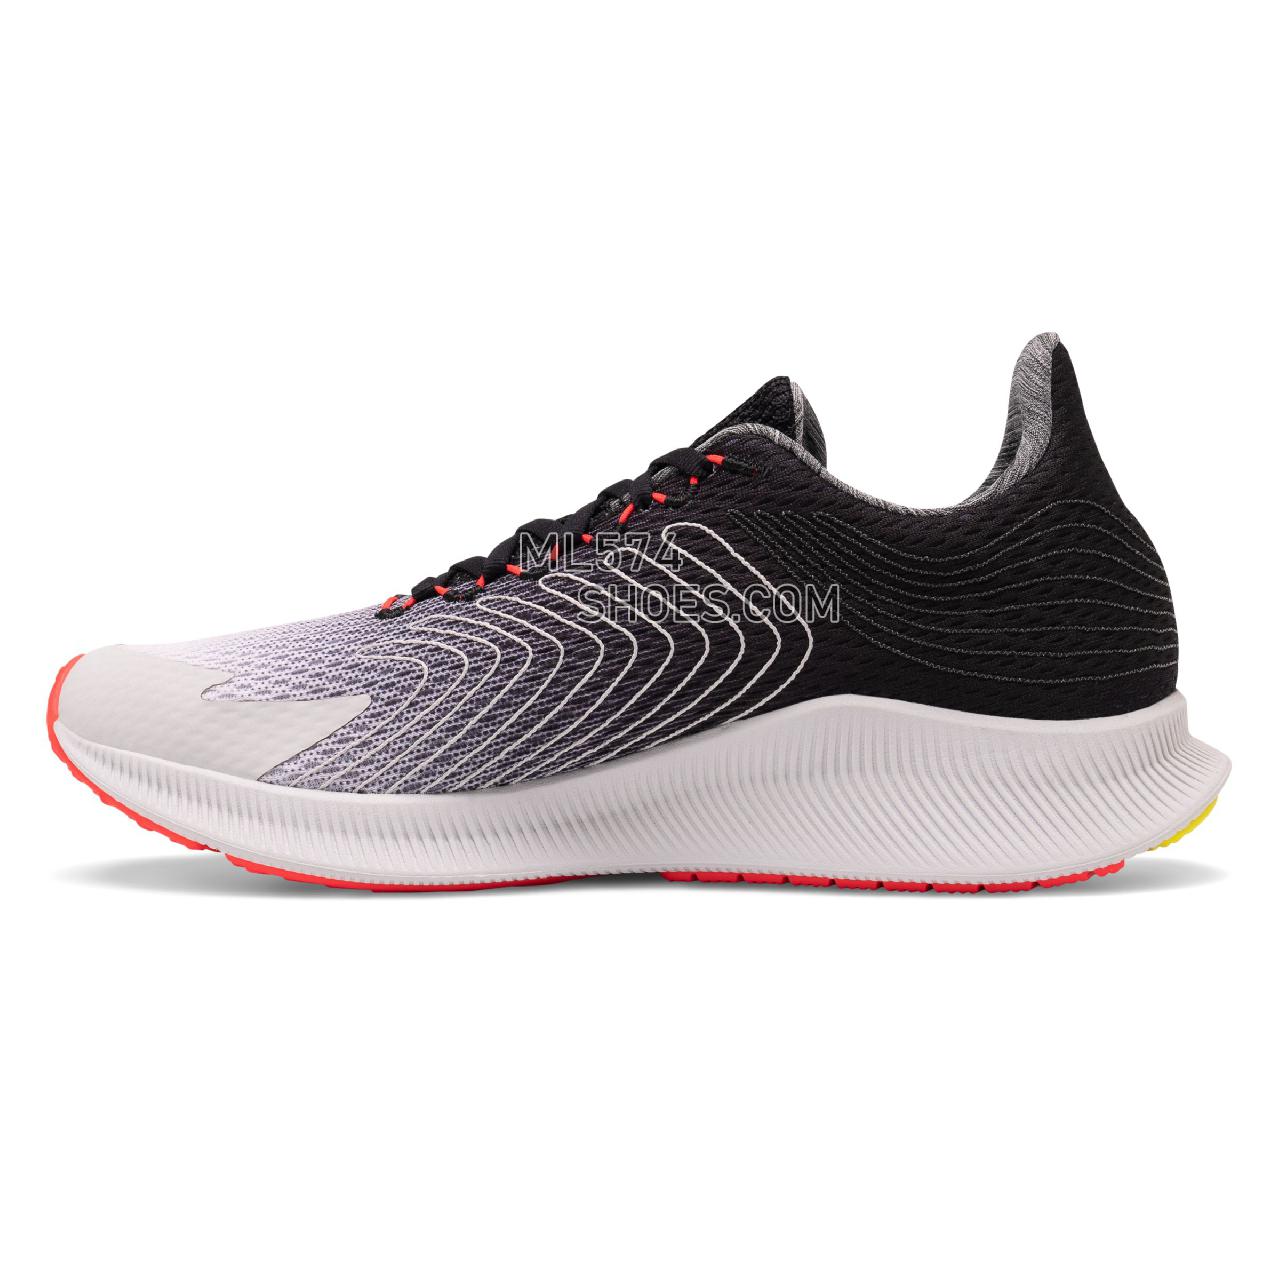 New Balance FuelCell Propel - Men's FuelCell Propel Running - Summer Fog with Black and Bayside - MFCPRLF1